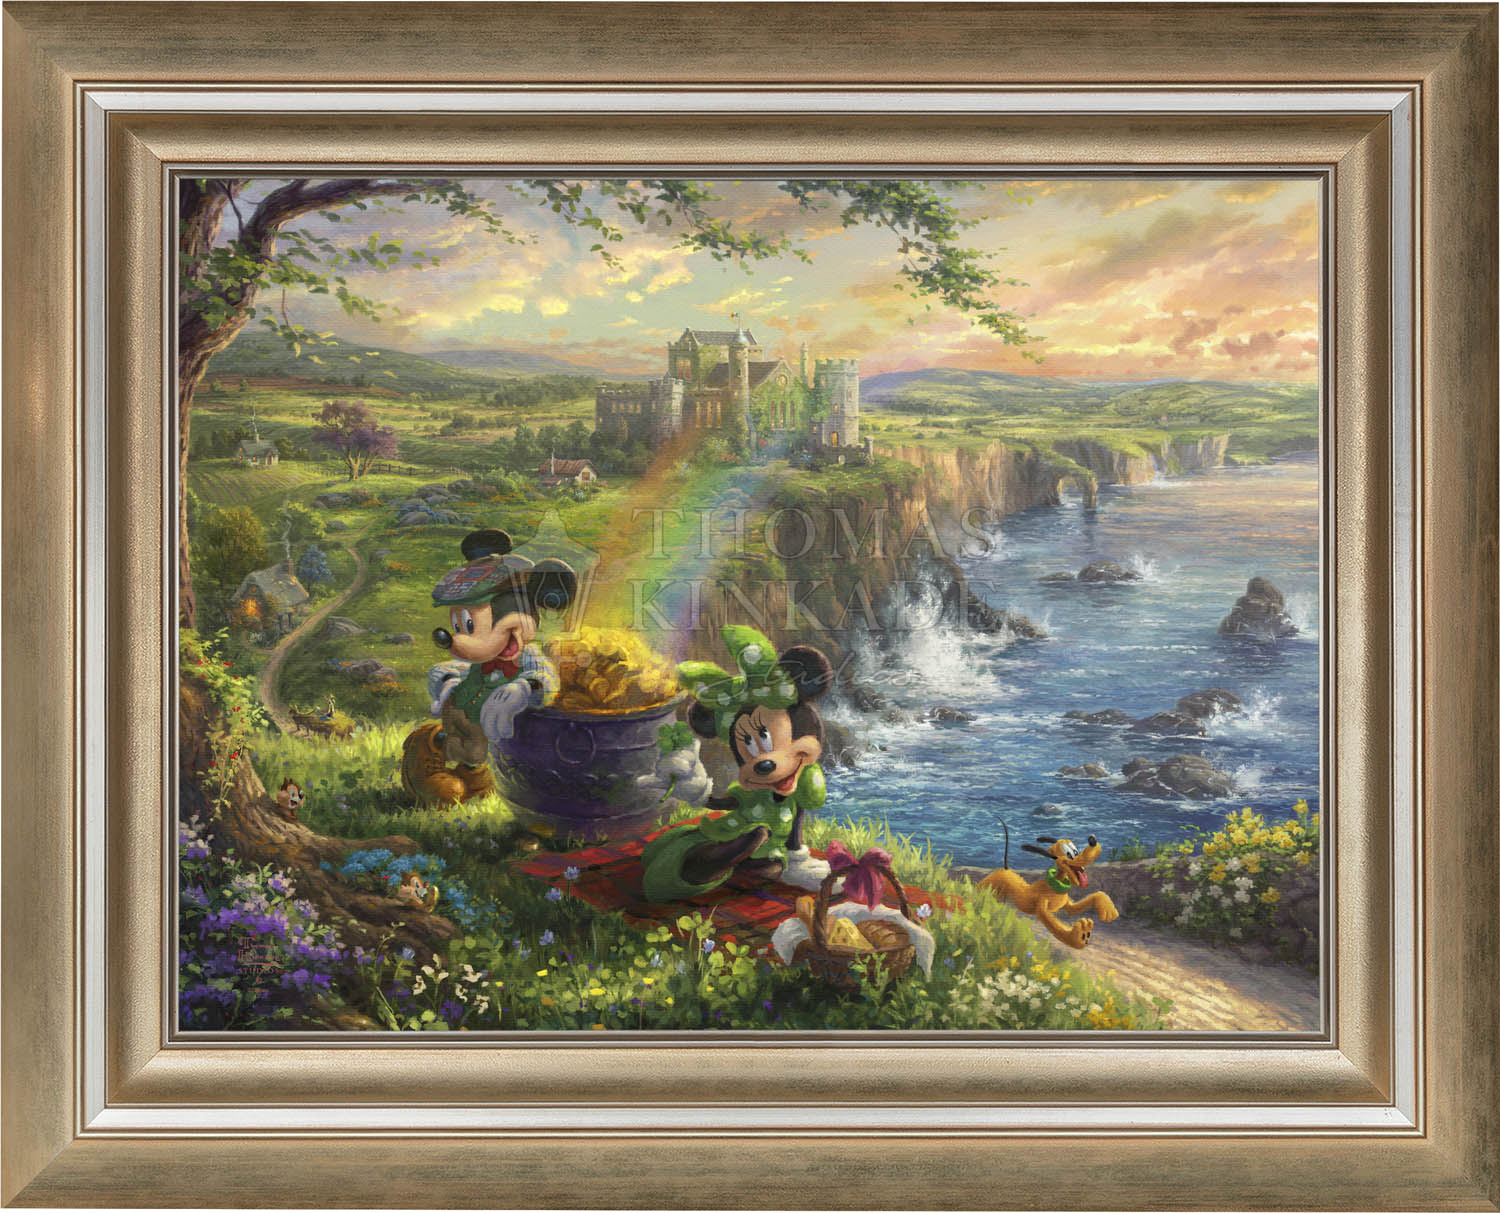 Dressed in the Irish's traditional color, Mickey and Minnie seem to have luck on their side.  Brushed Gold Frame